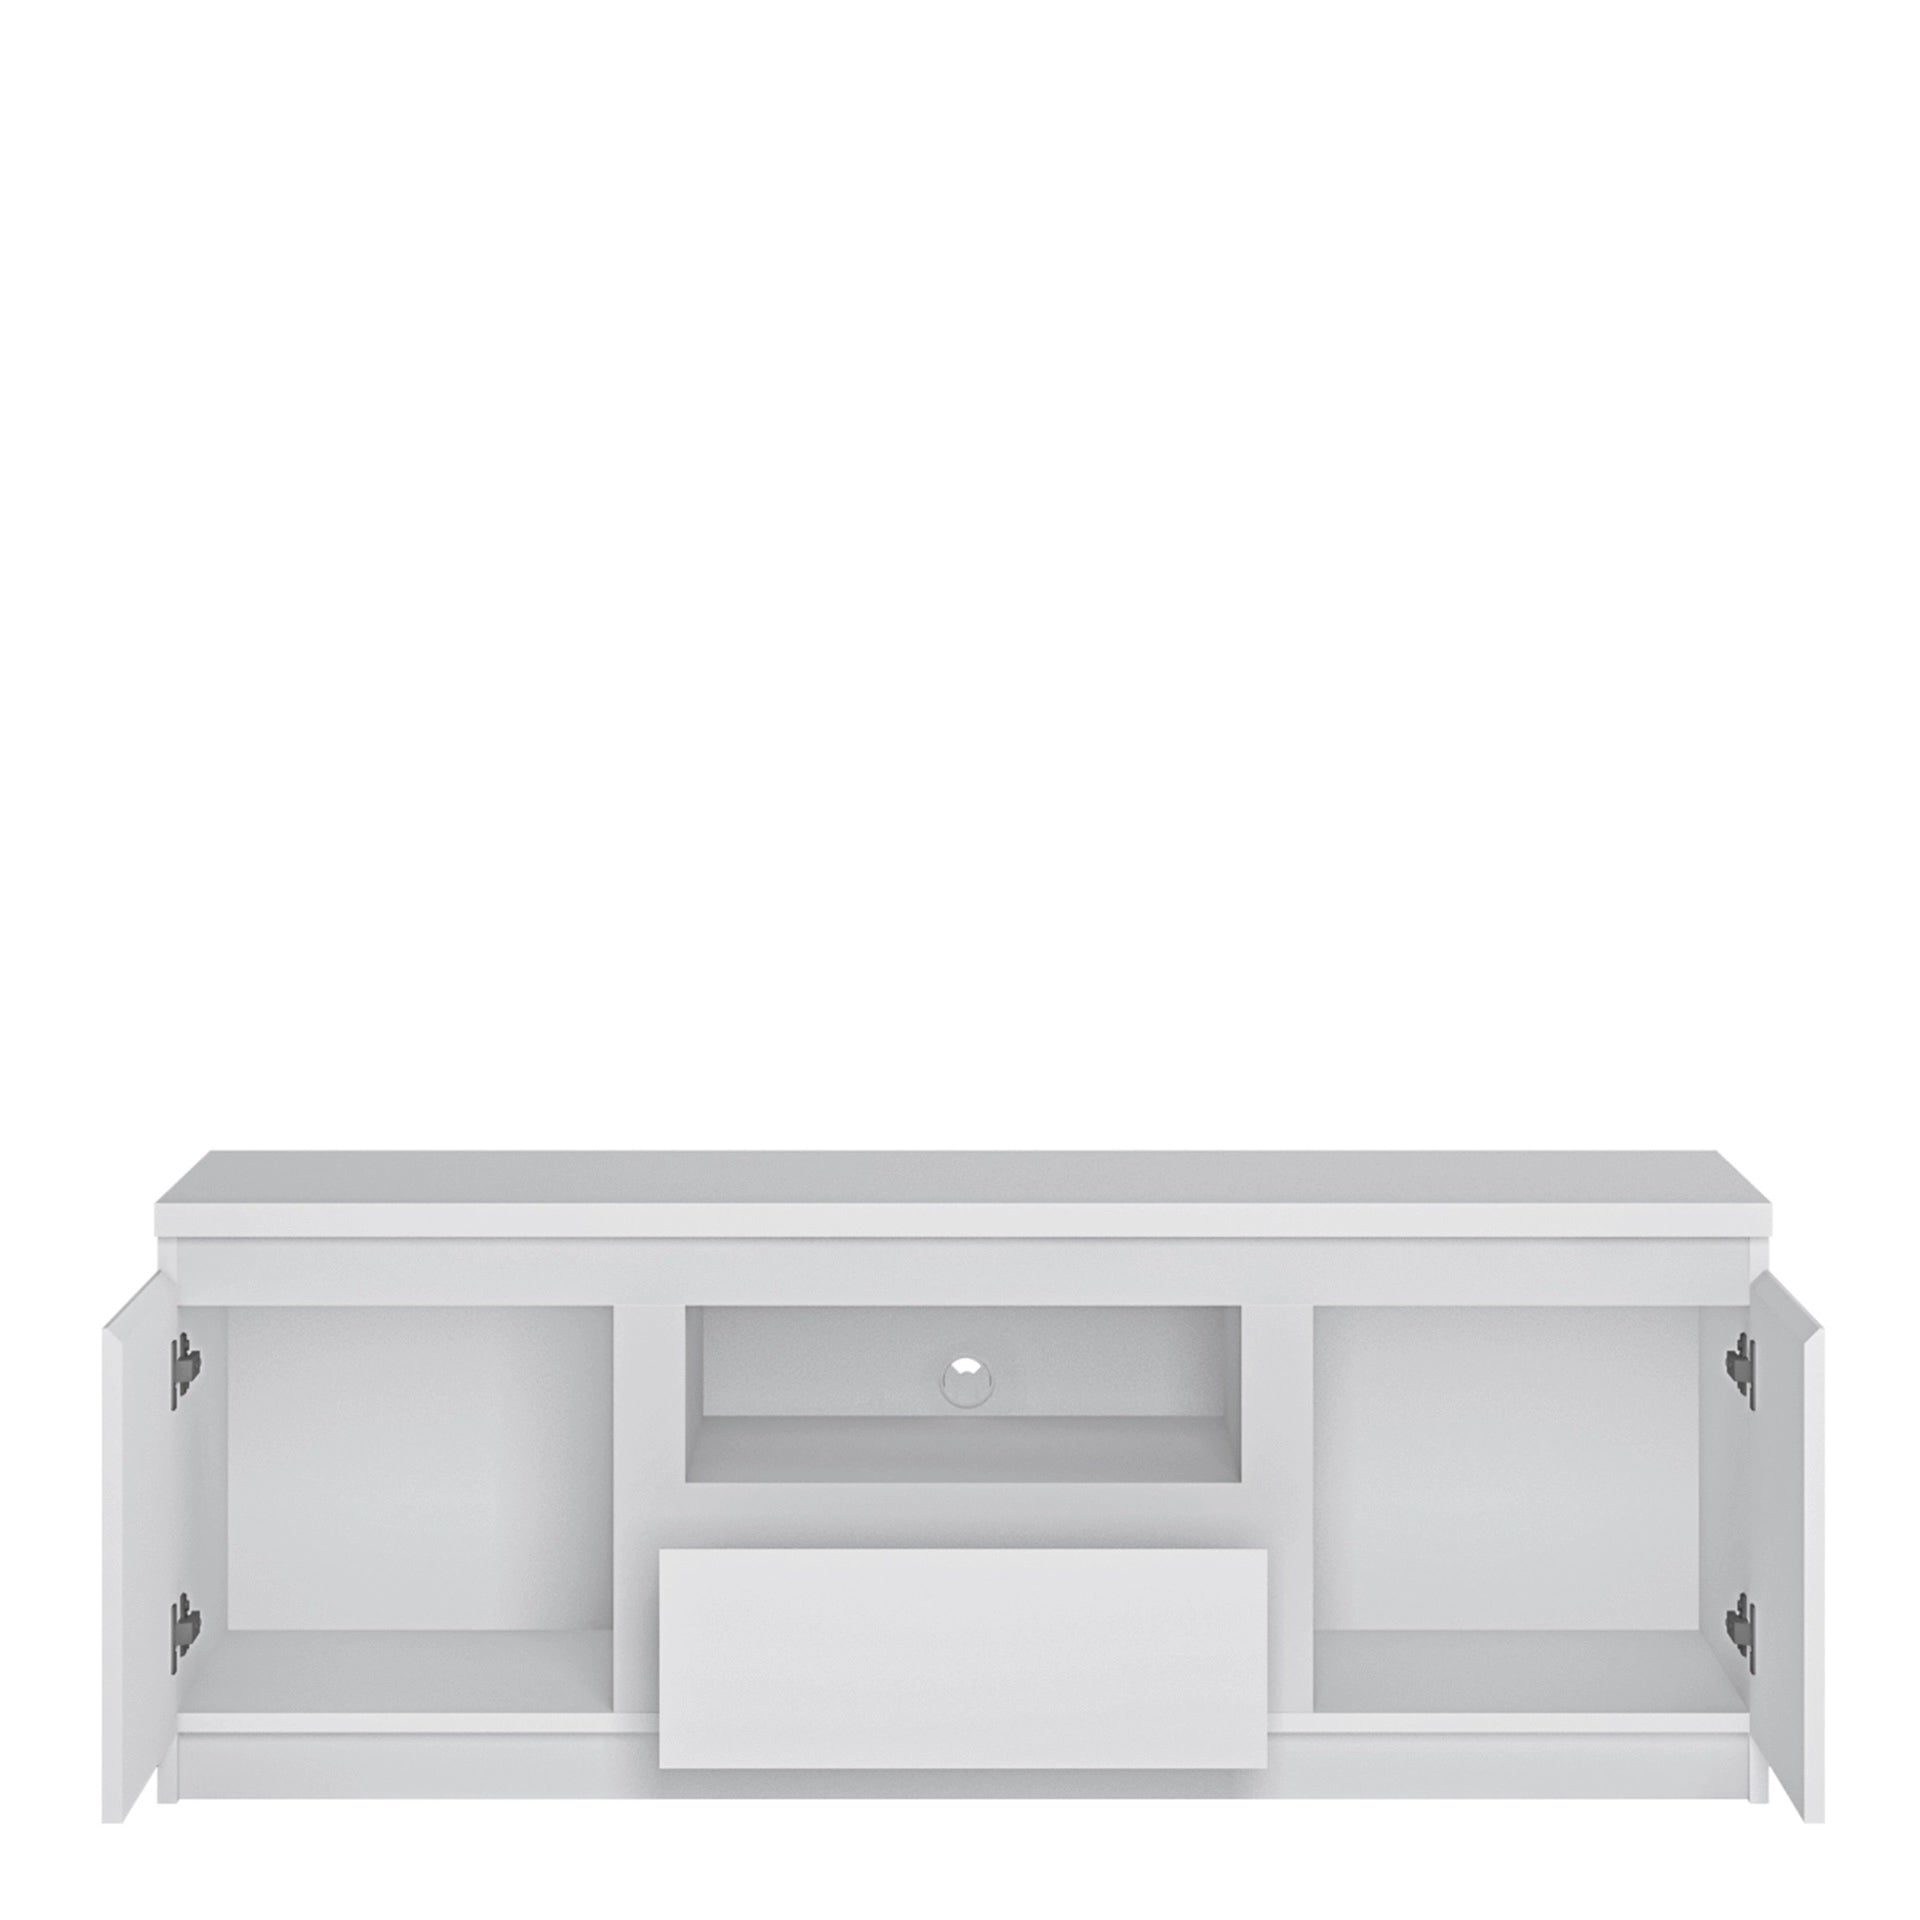 Furniture To Go Fribo 2 Door 1 Drawer 136cm Wide TV Cabinet in White